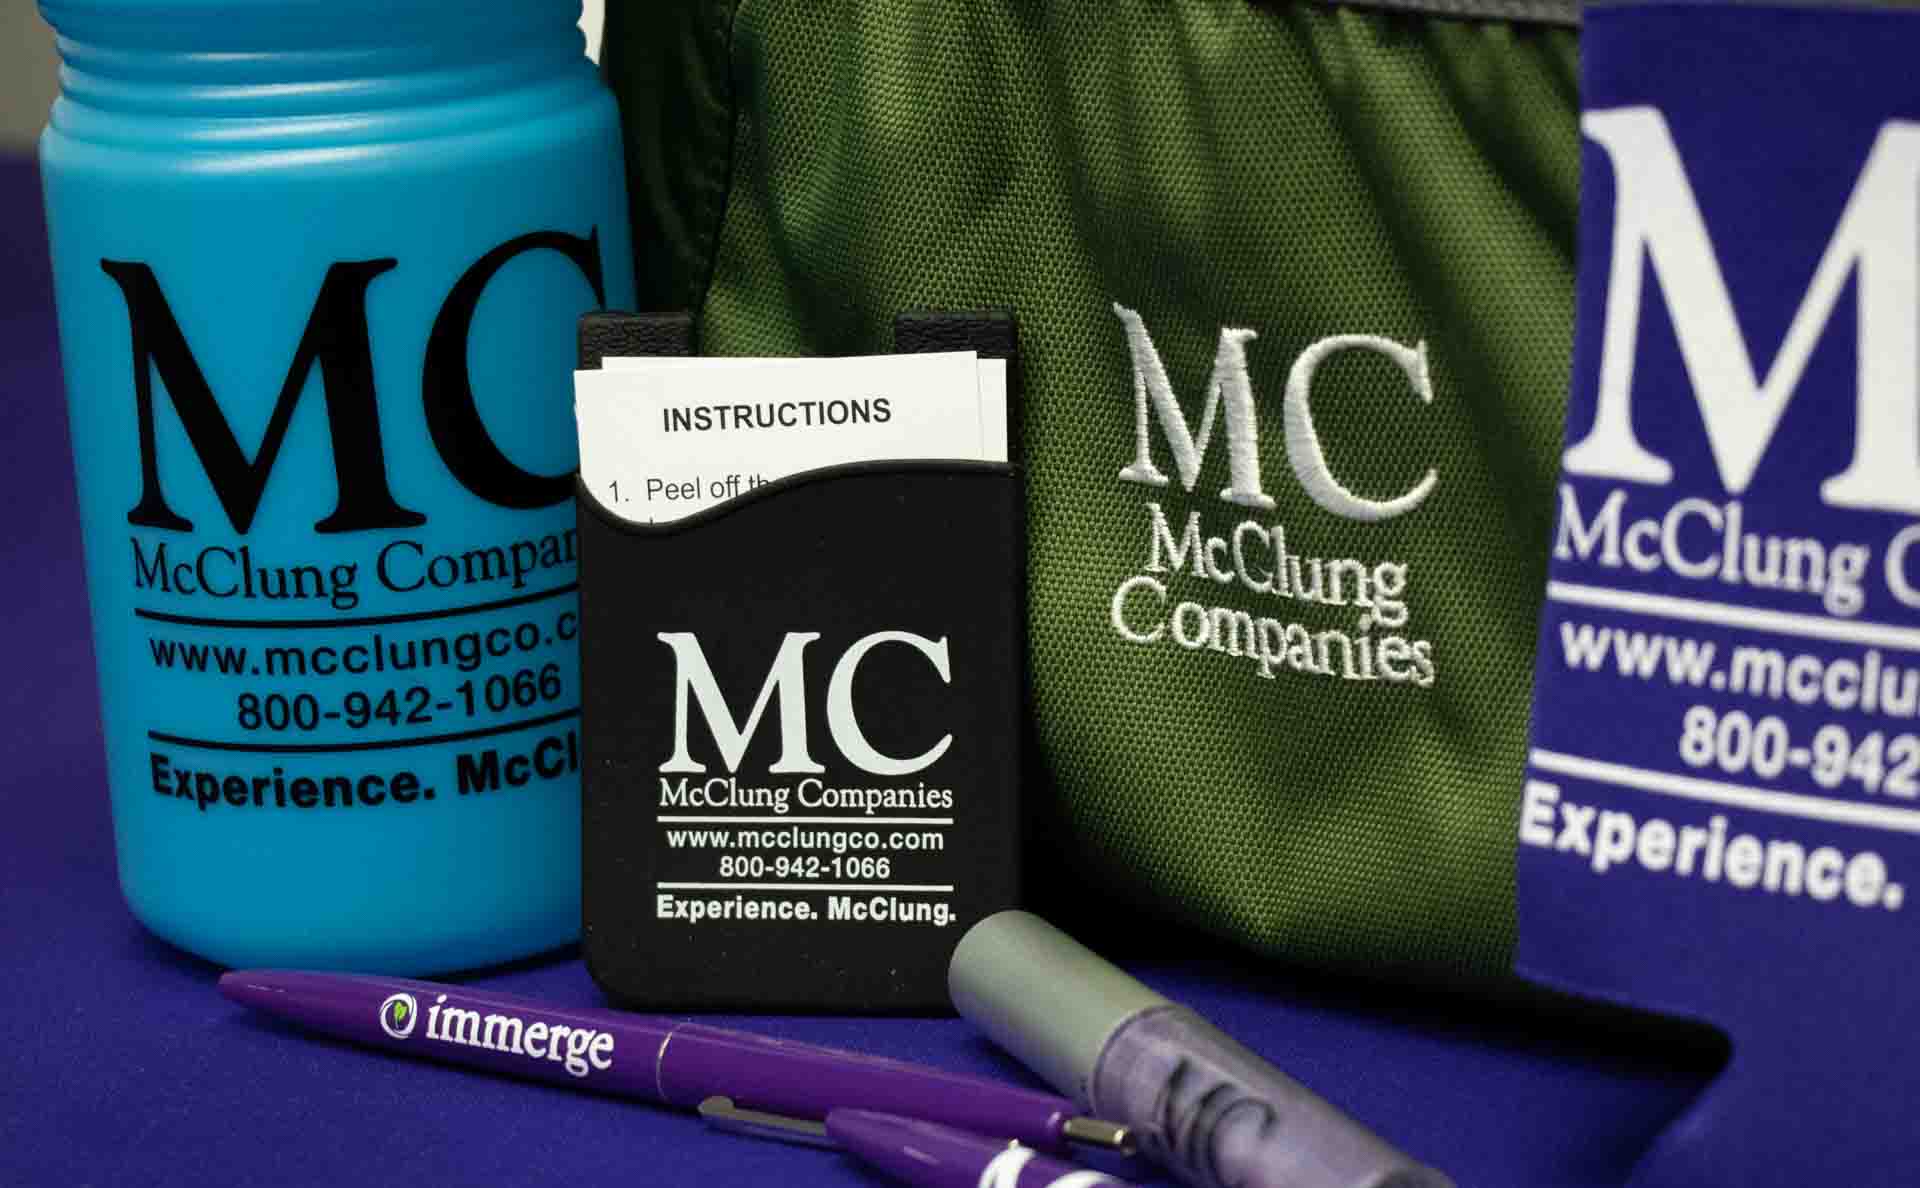 McClung branded promotional materials scattered on table.